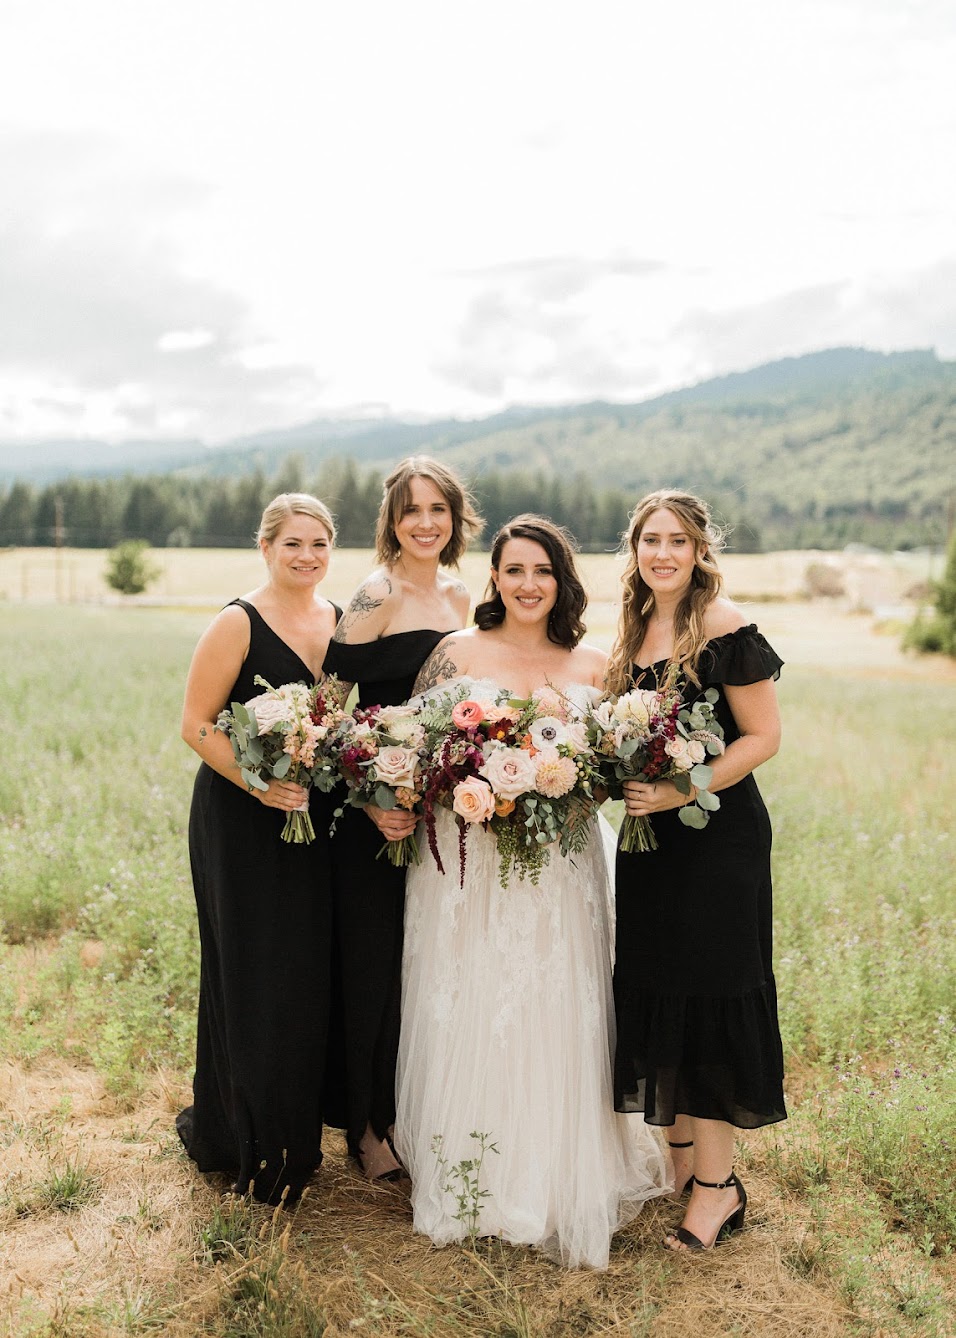 The bride and her bridesmaids are standing close to each other.  